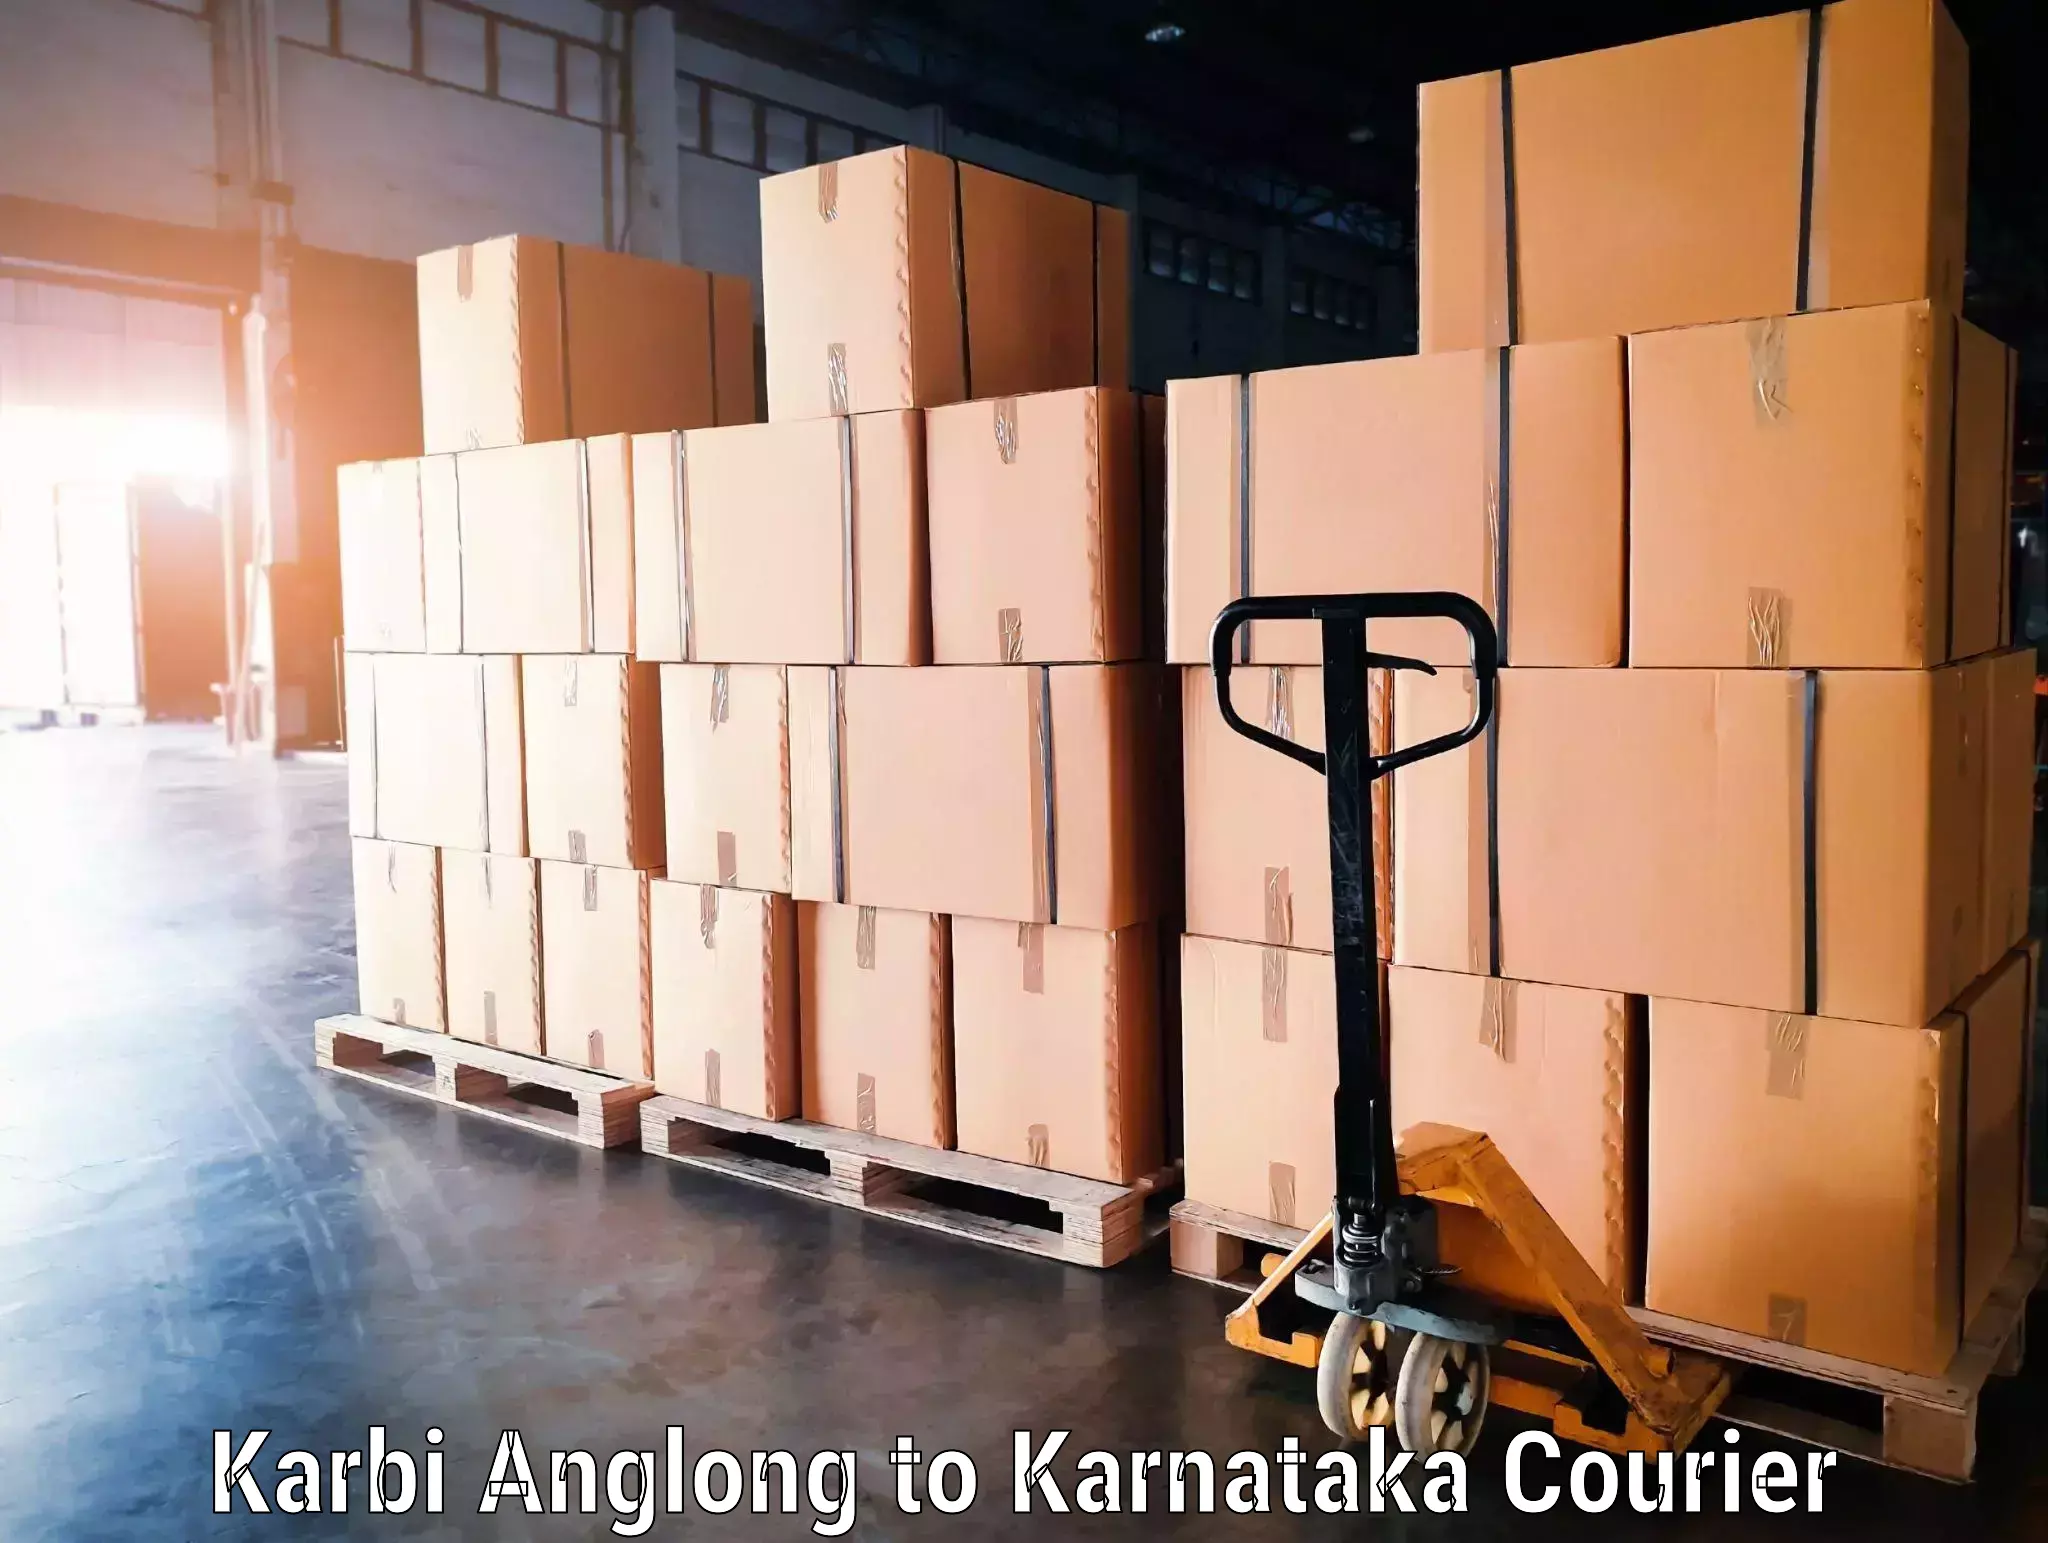 Instant baggage transport quote Karbi Anglong to Nagamangala